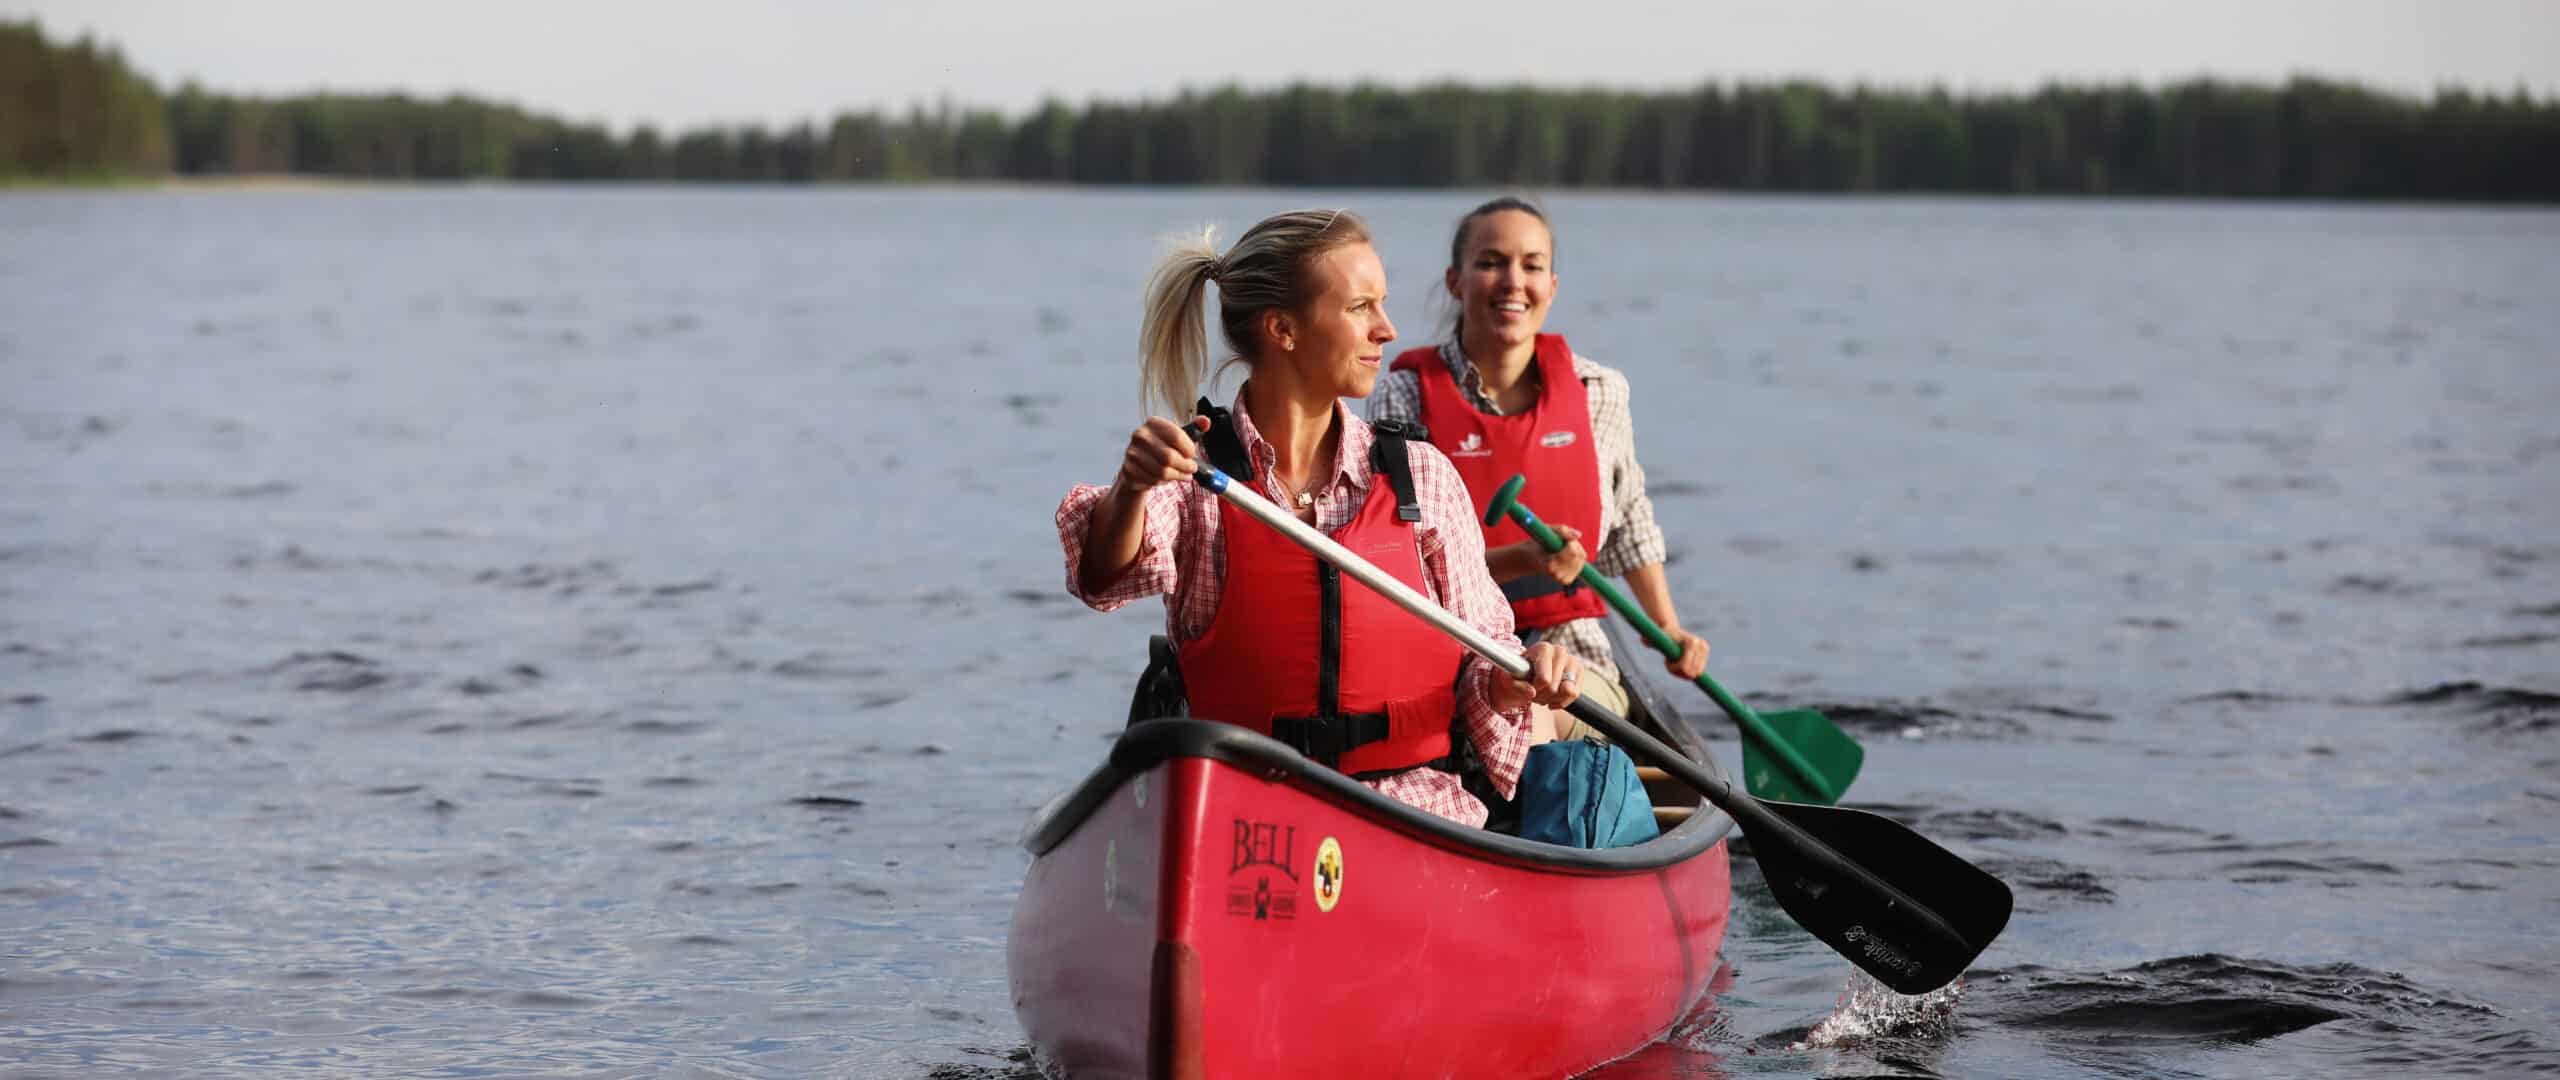 Two women paddling on the lake in Finland